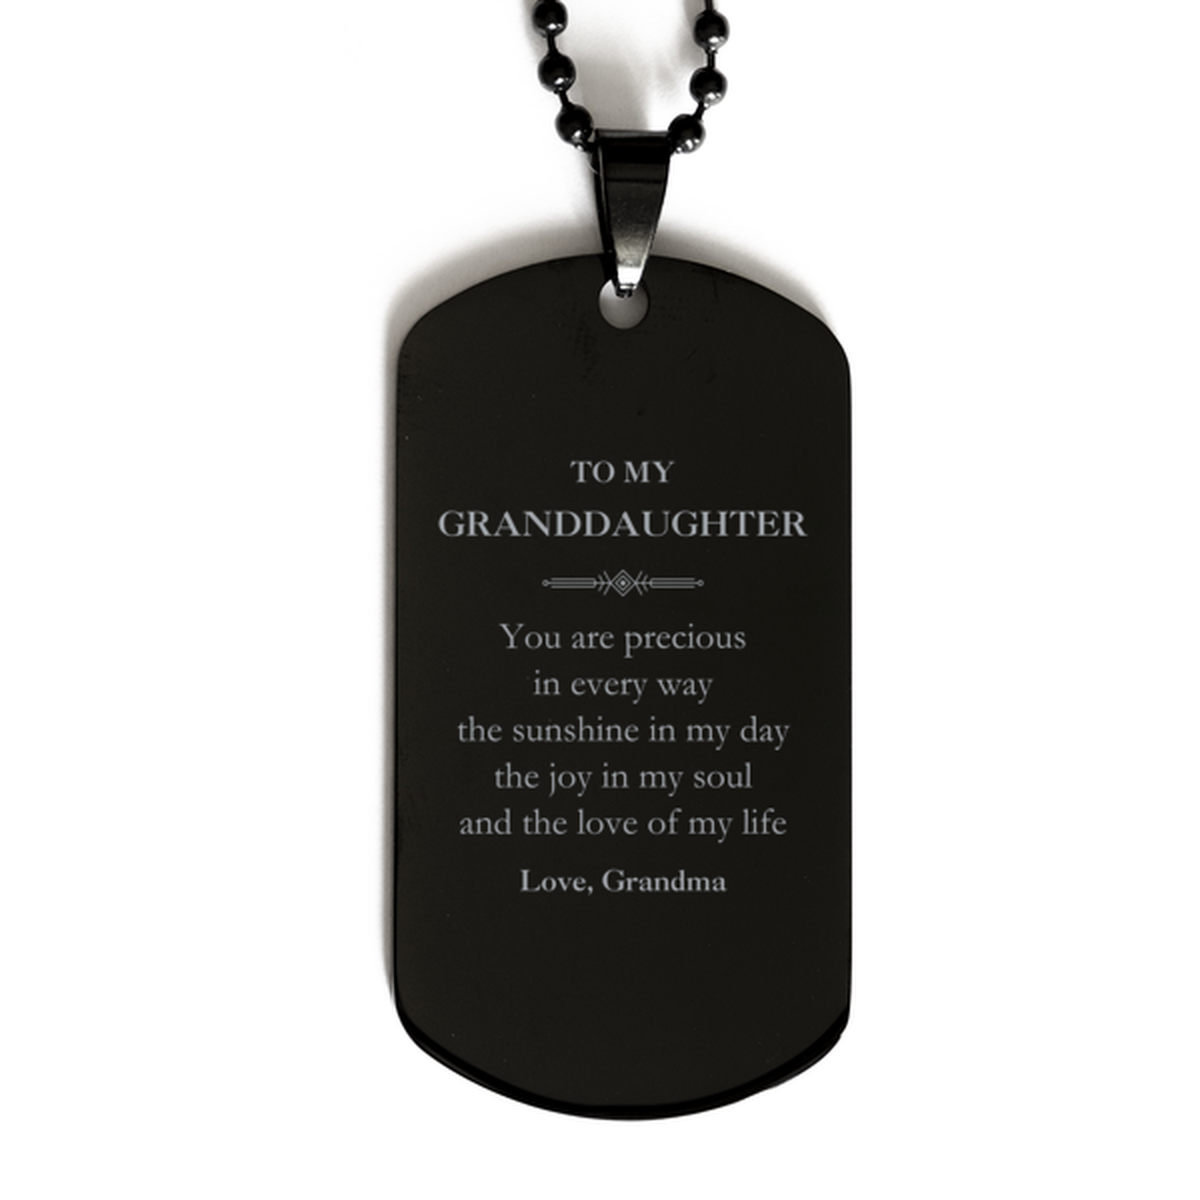 Graduation Gifts for Granddaughter Black Dog Tag Present from Grandma, Christmas Granddaughter Birthday Gifts Granddaughter You are precious in every way the sunshine in my day. Love, Grandma